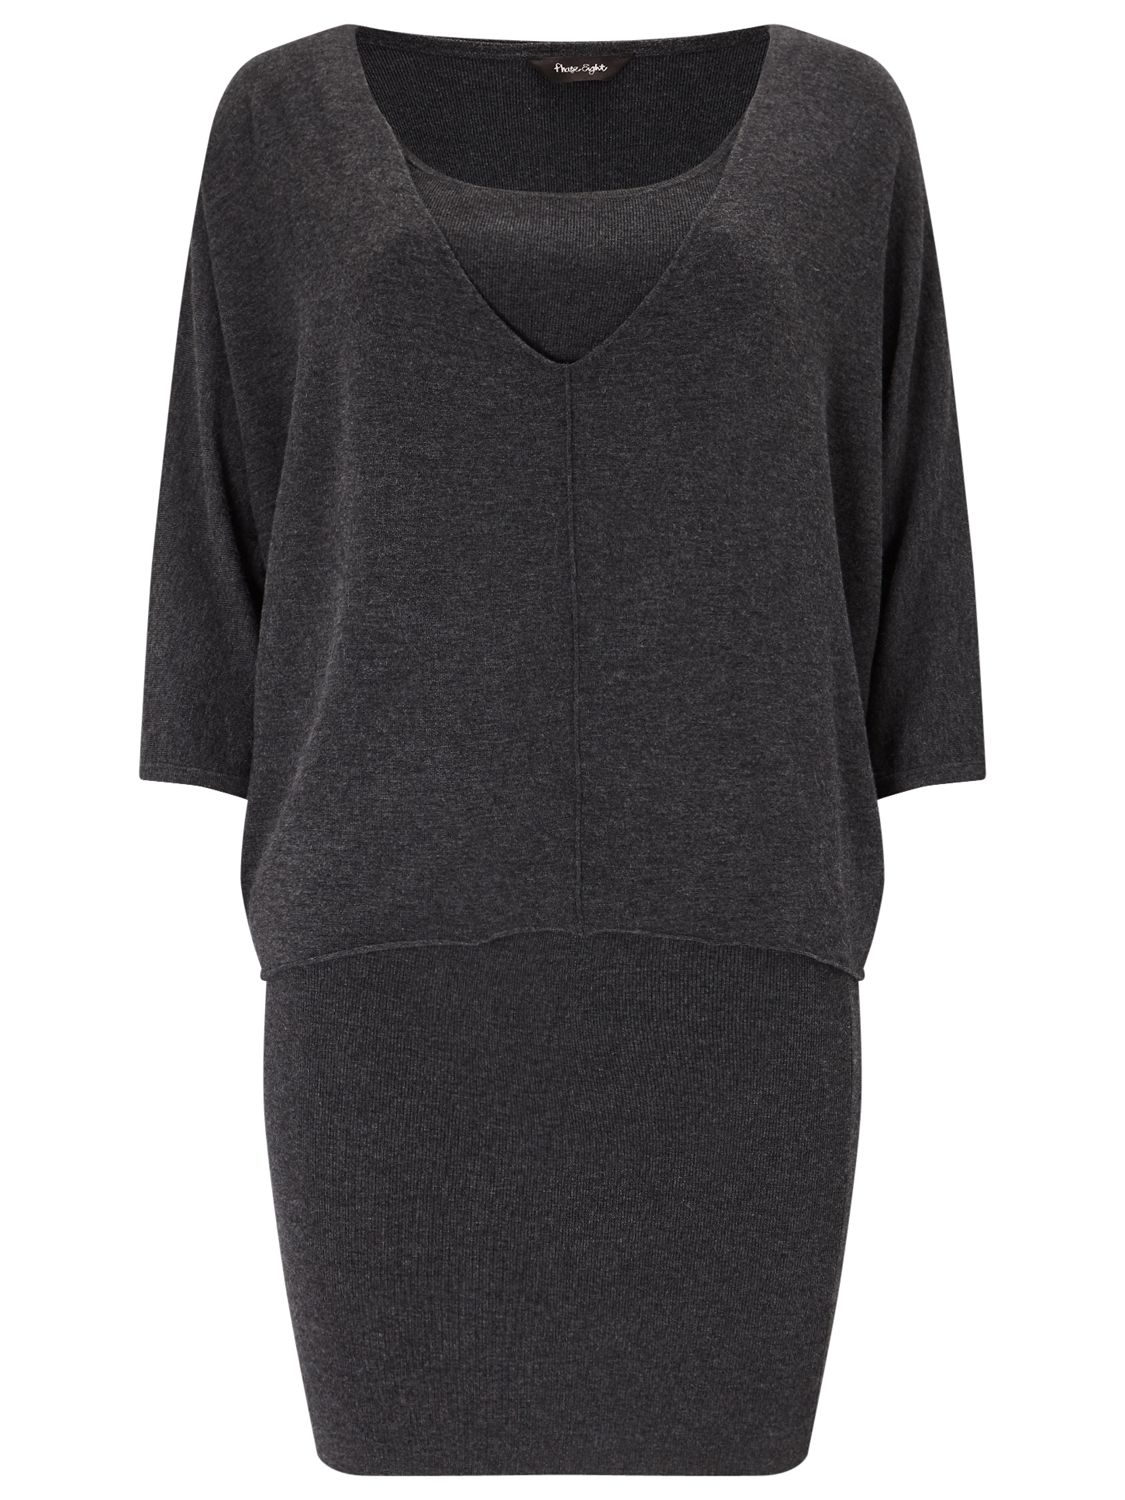 Phase Eight Carmen Double Layer Knitted Dress, Charcoal at John Lewis